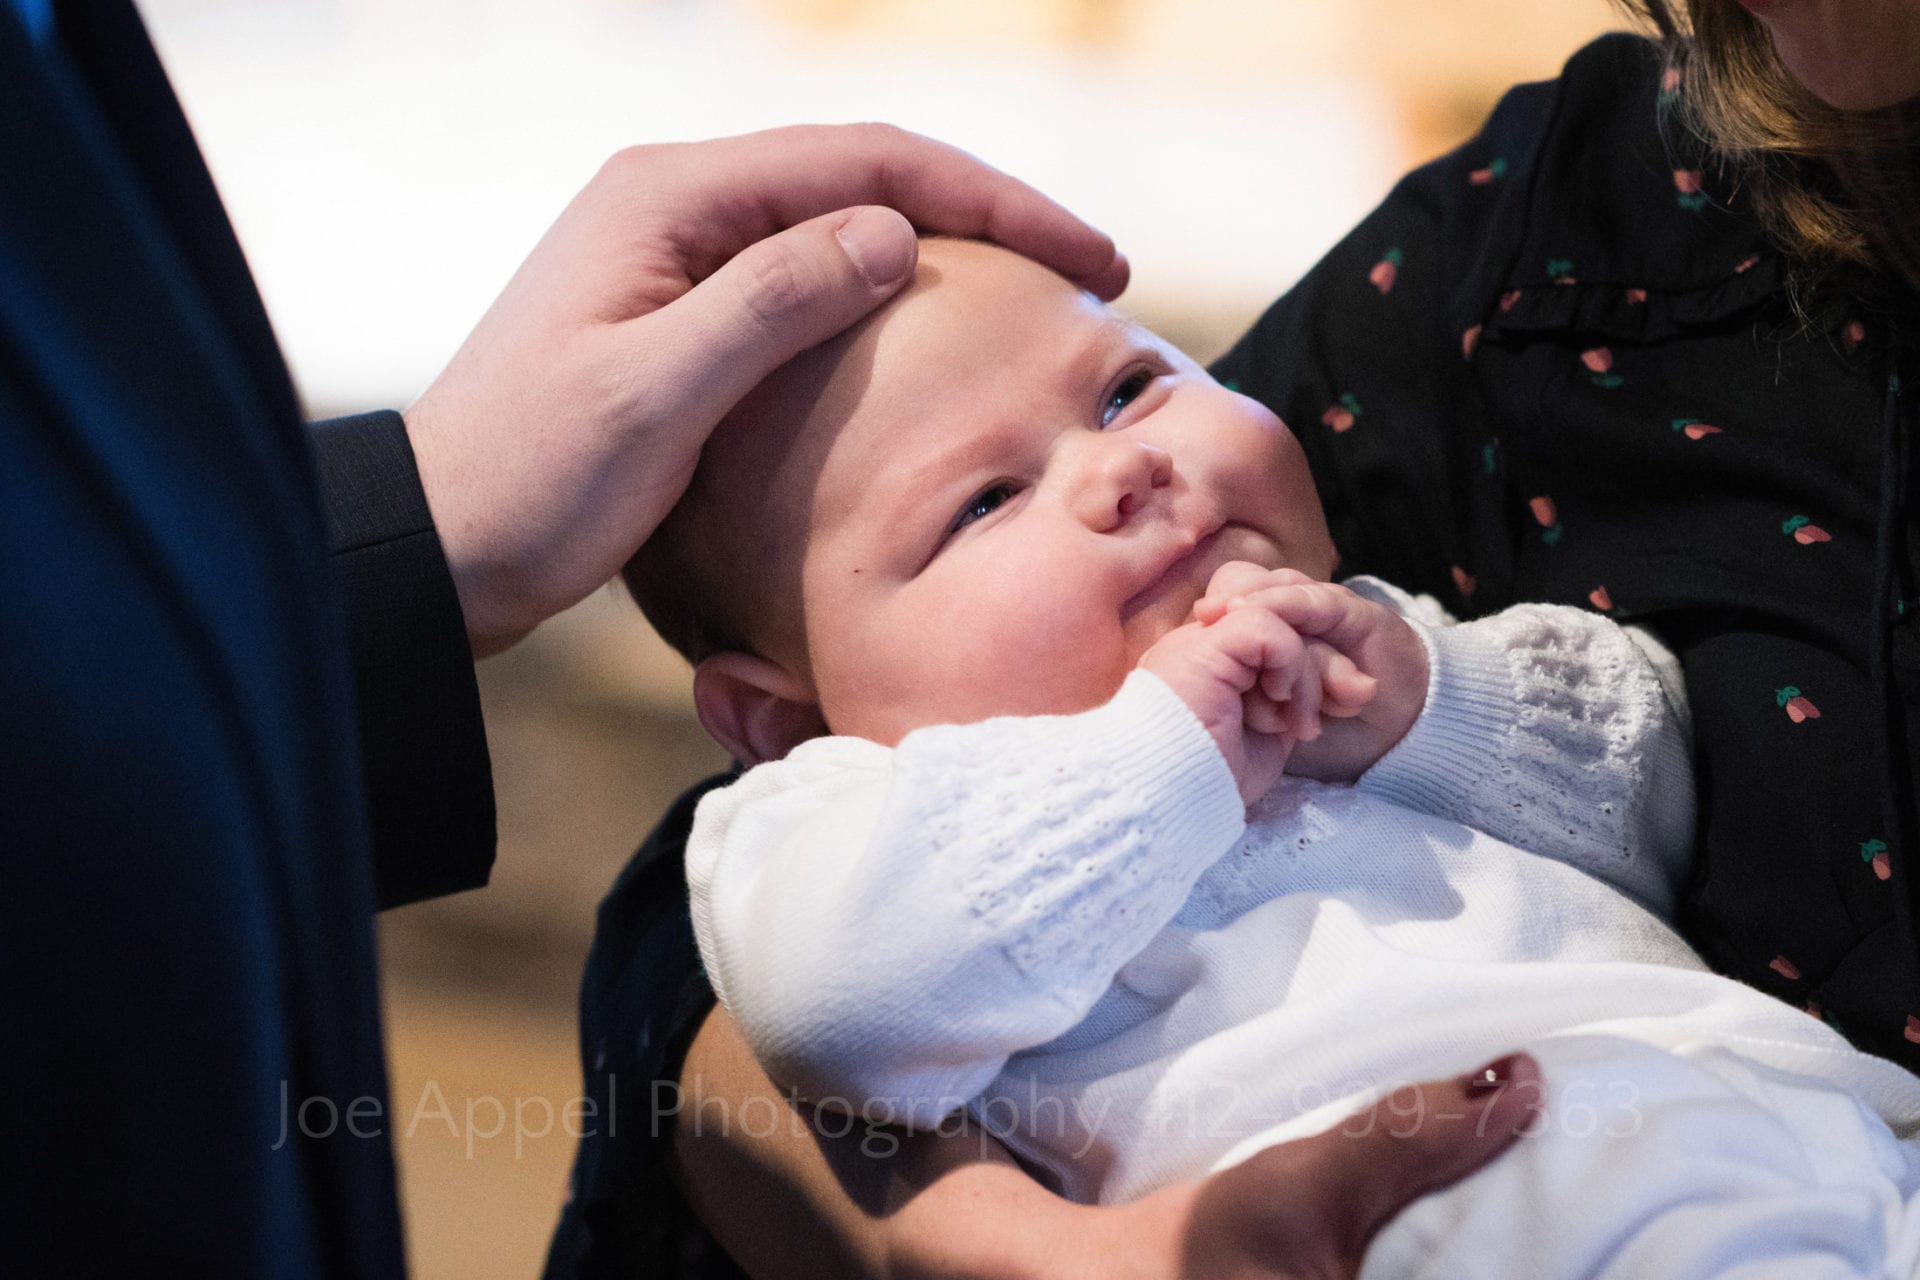 An infant in a white sweater folds his hands together and seems to smile as a man's hand rests on his forehead during a Baptism at Saints John and Paul Parish.